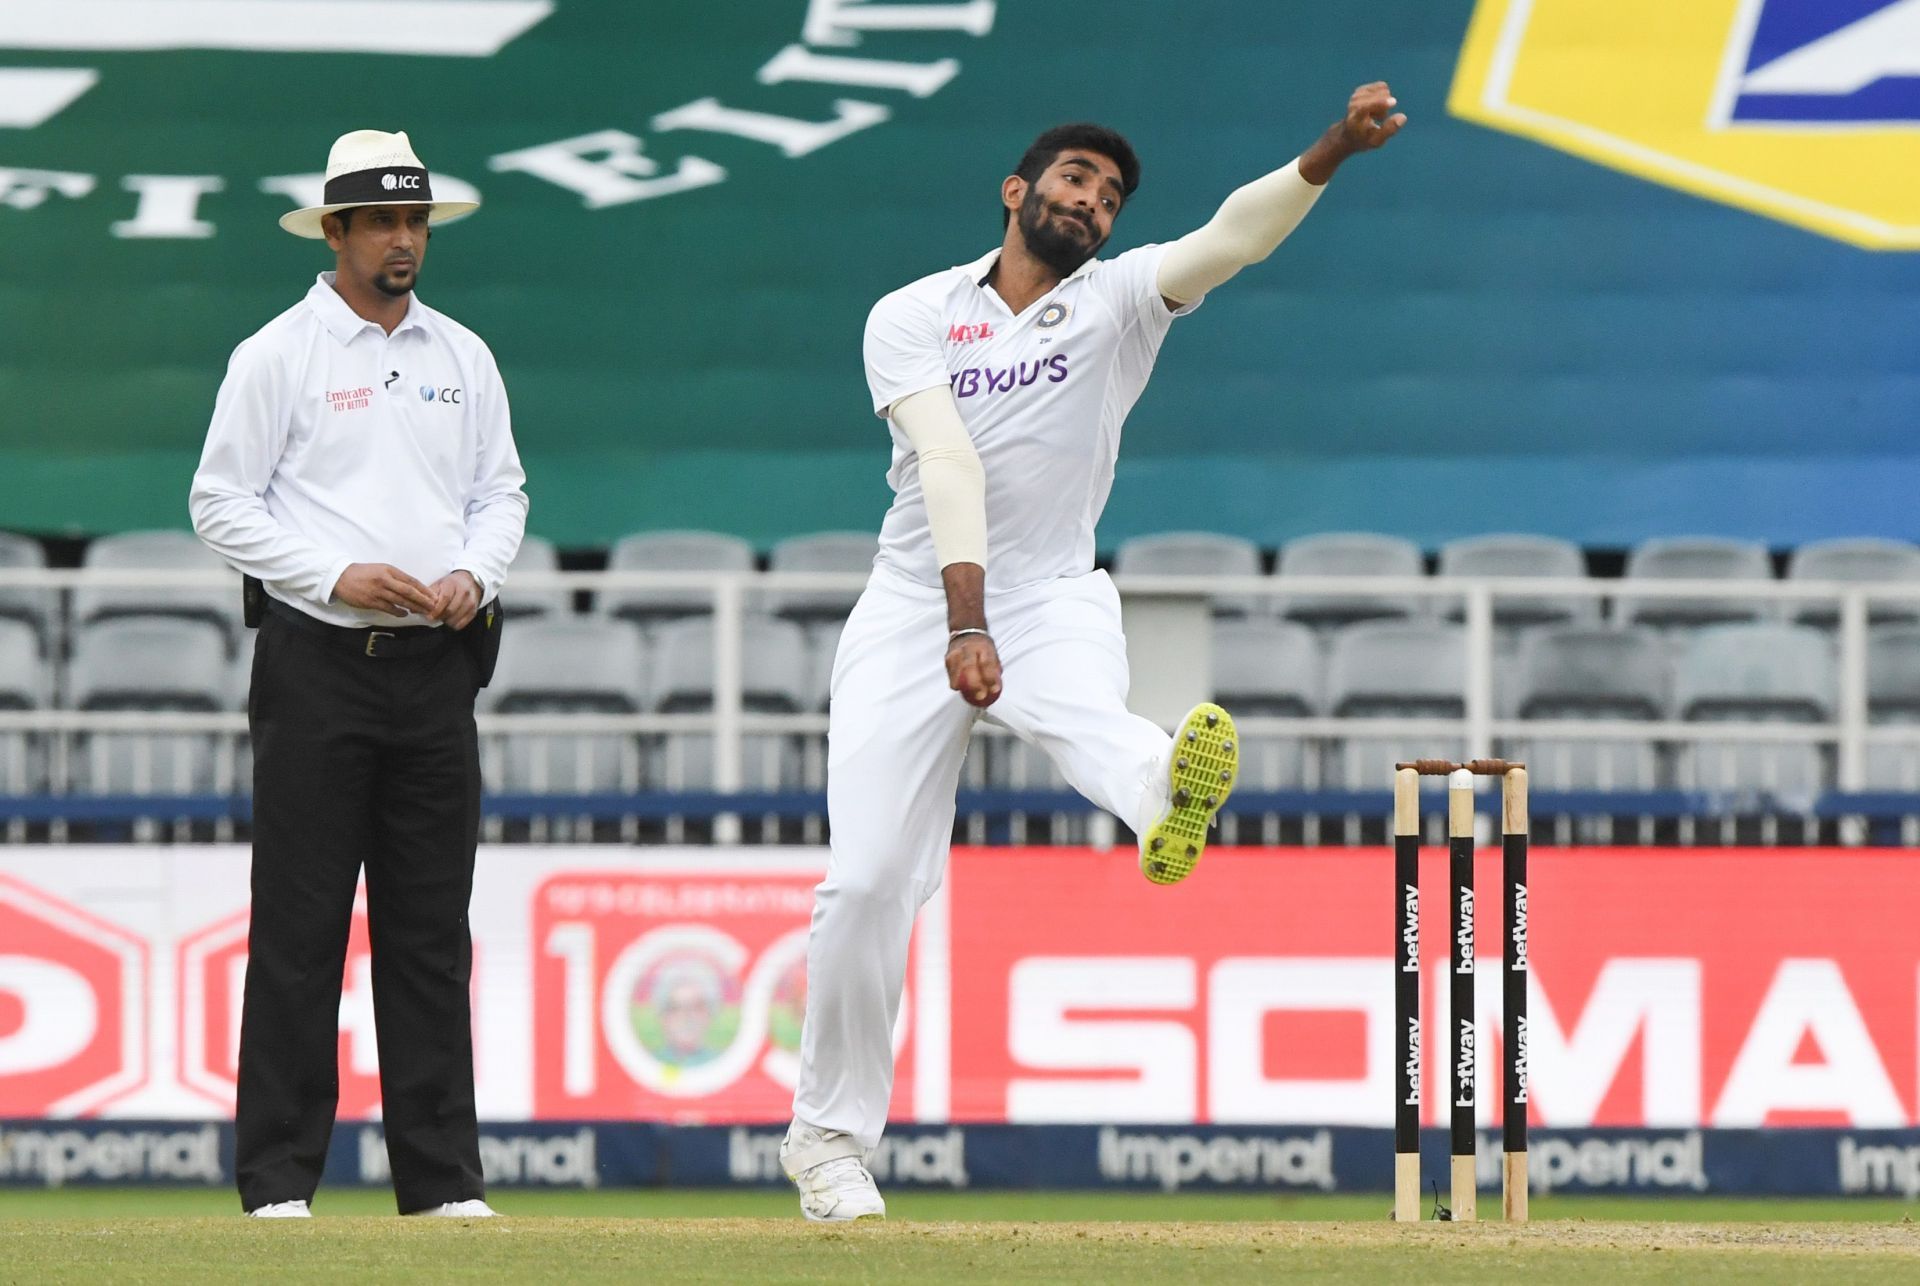 Jasprit Bumrah will be expected to lead the Indian attack on Day 2 of the Cape Town Test